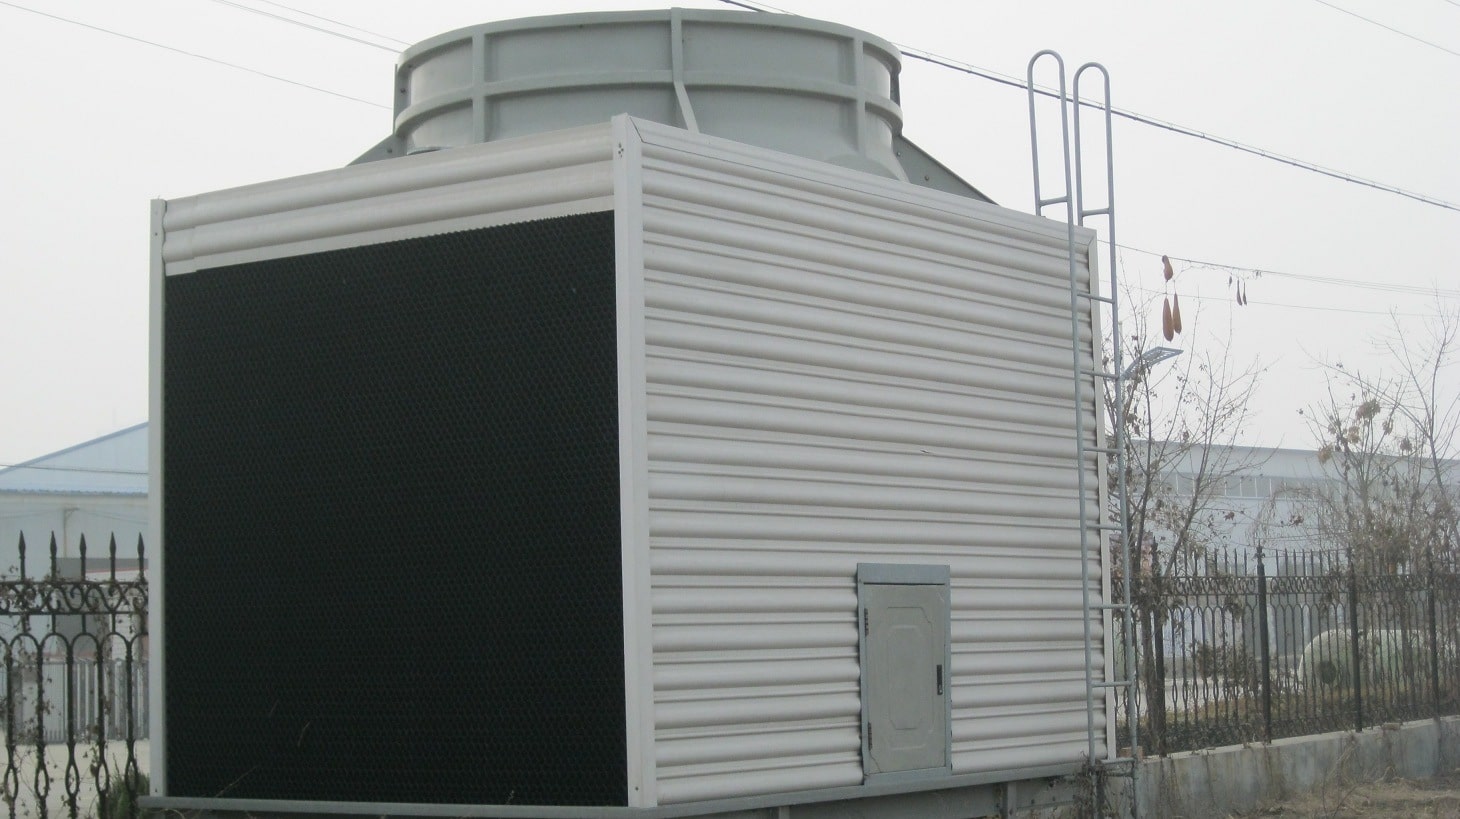 How Does Crossflow Cooling Towers Work?